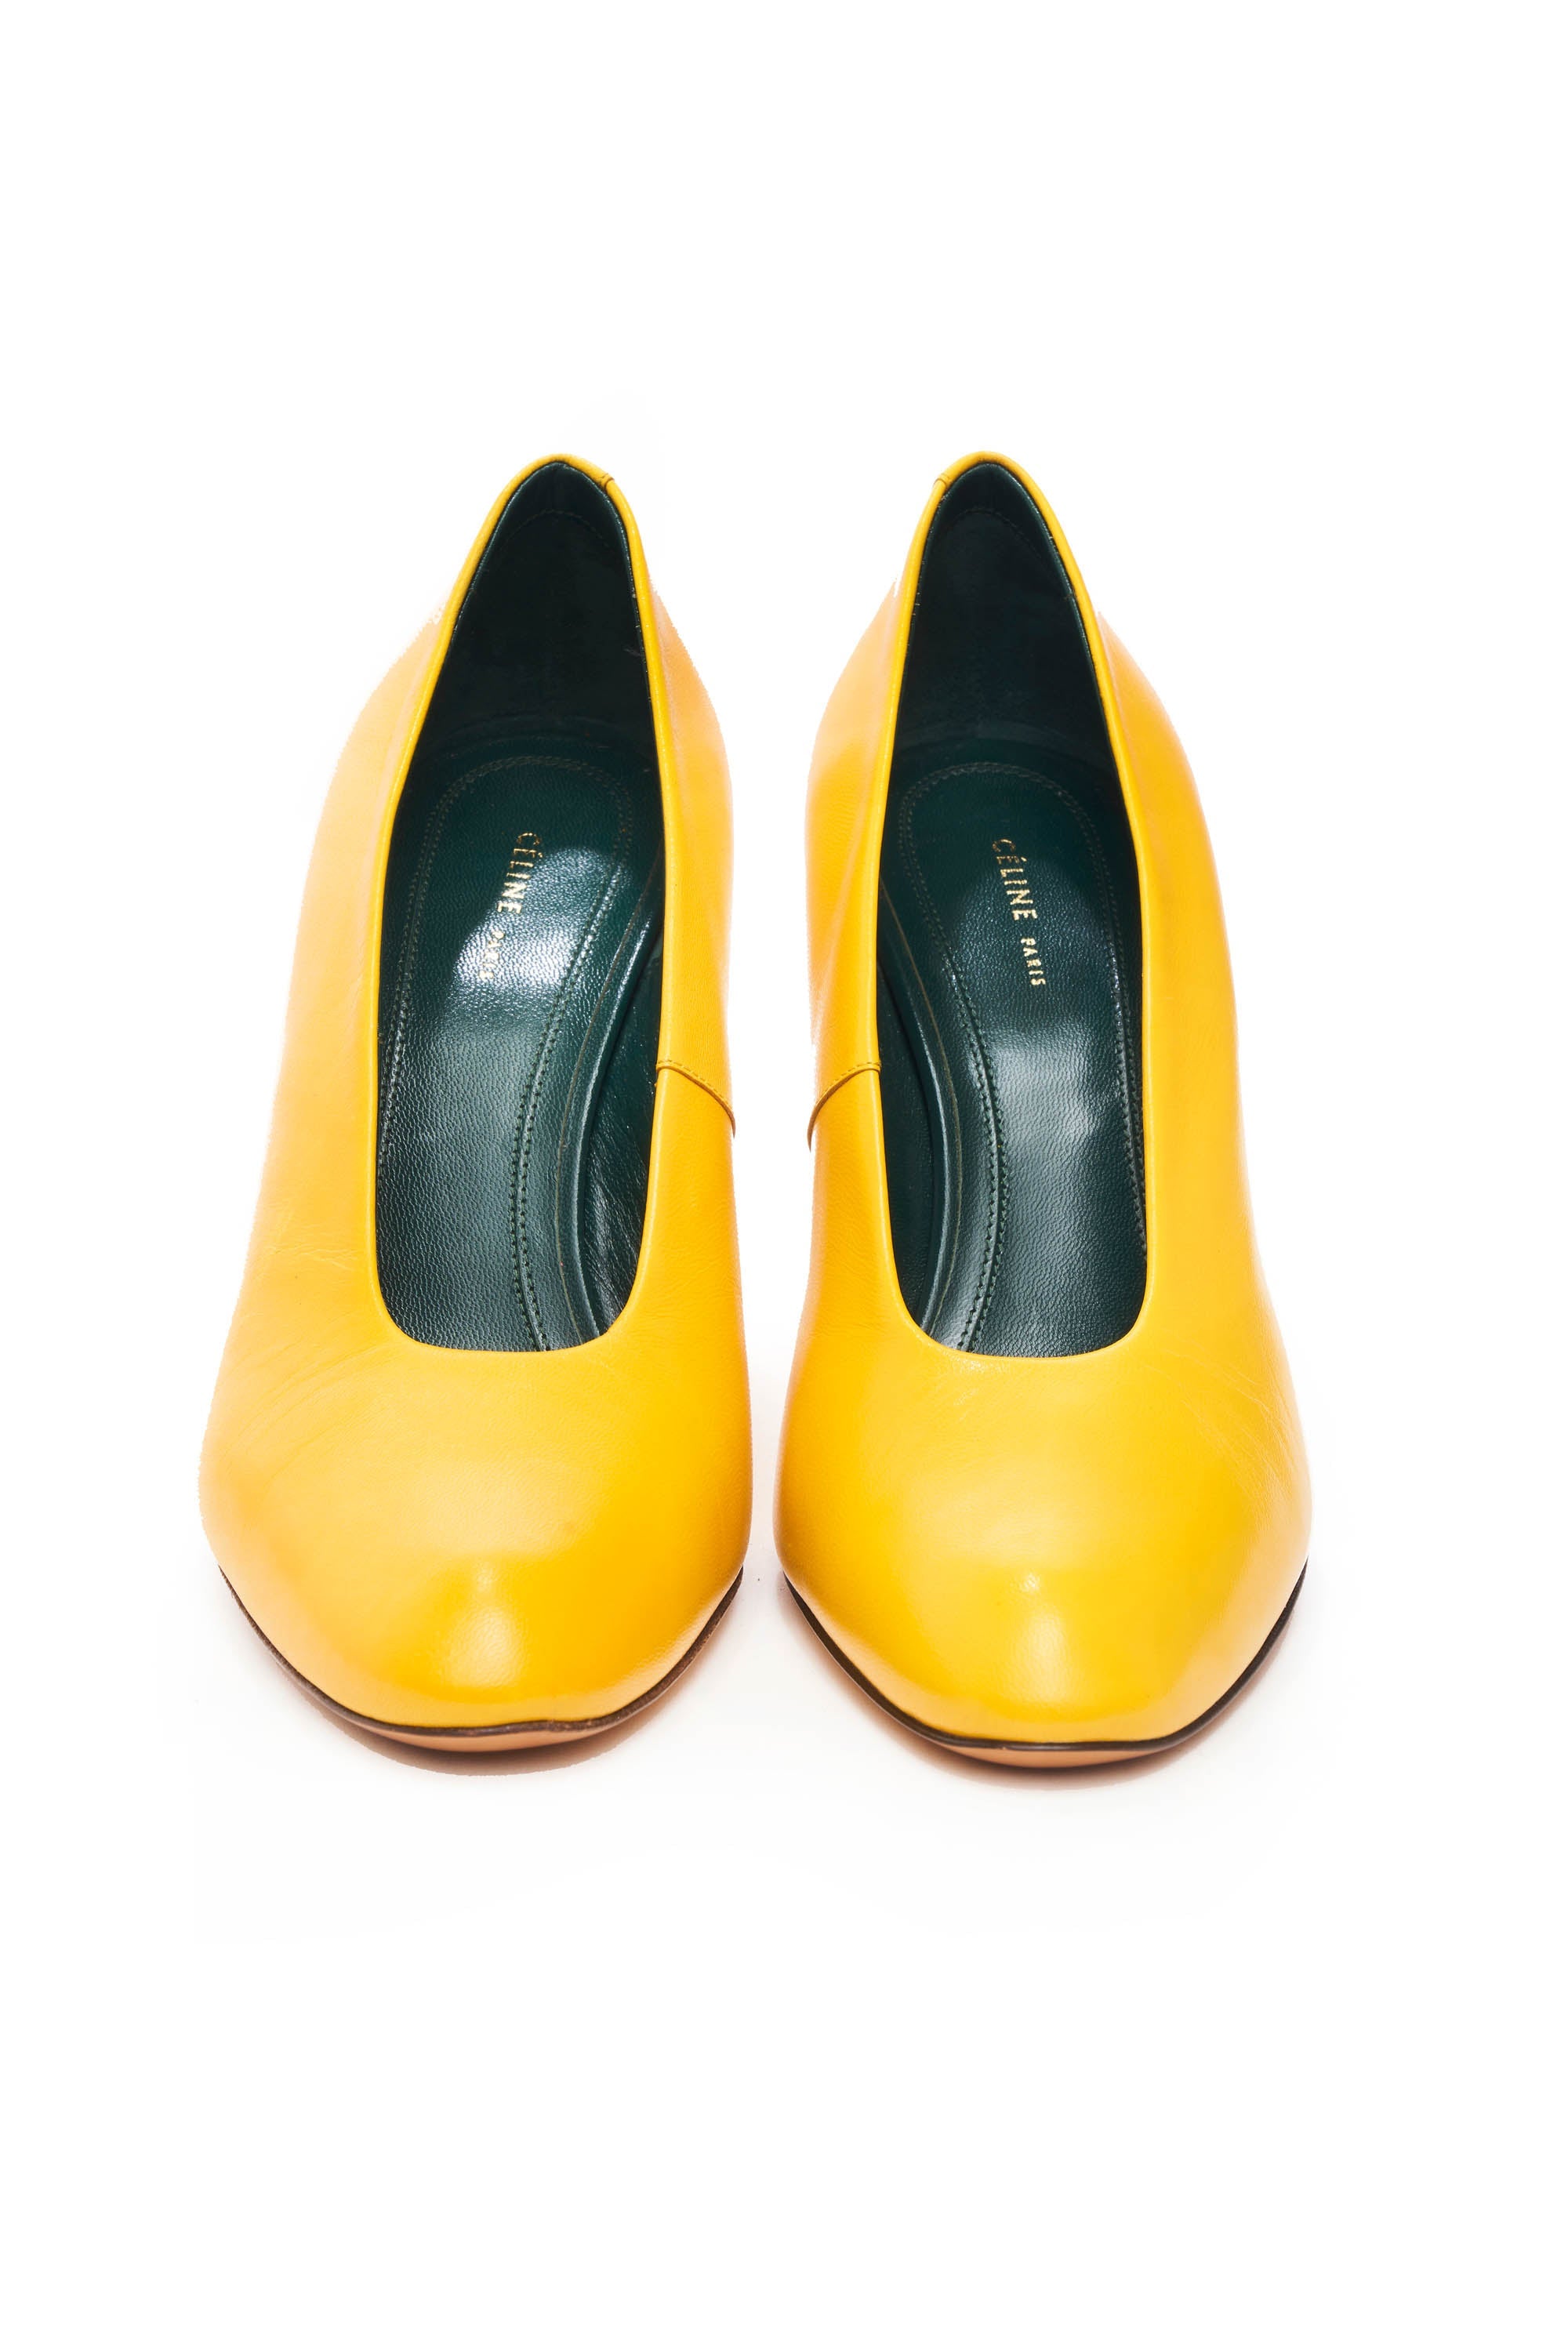 Celine Yellow Pumps with Red Heel Size 36